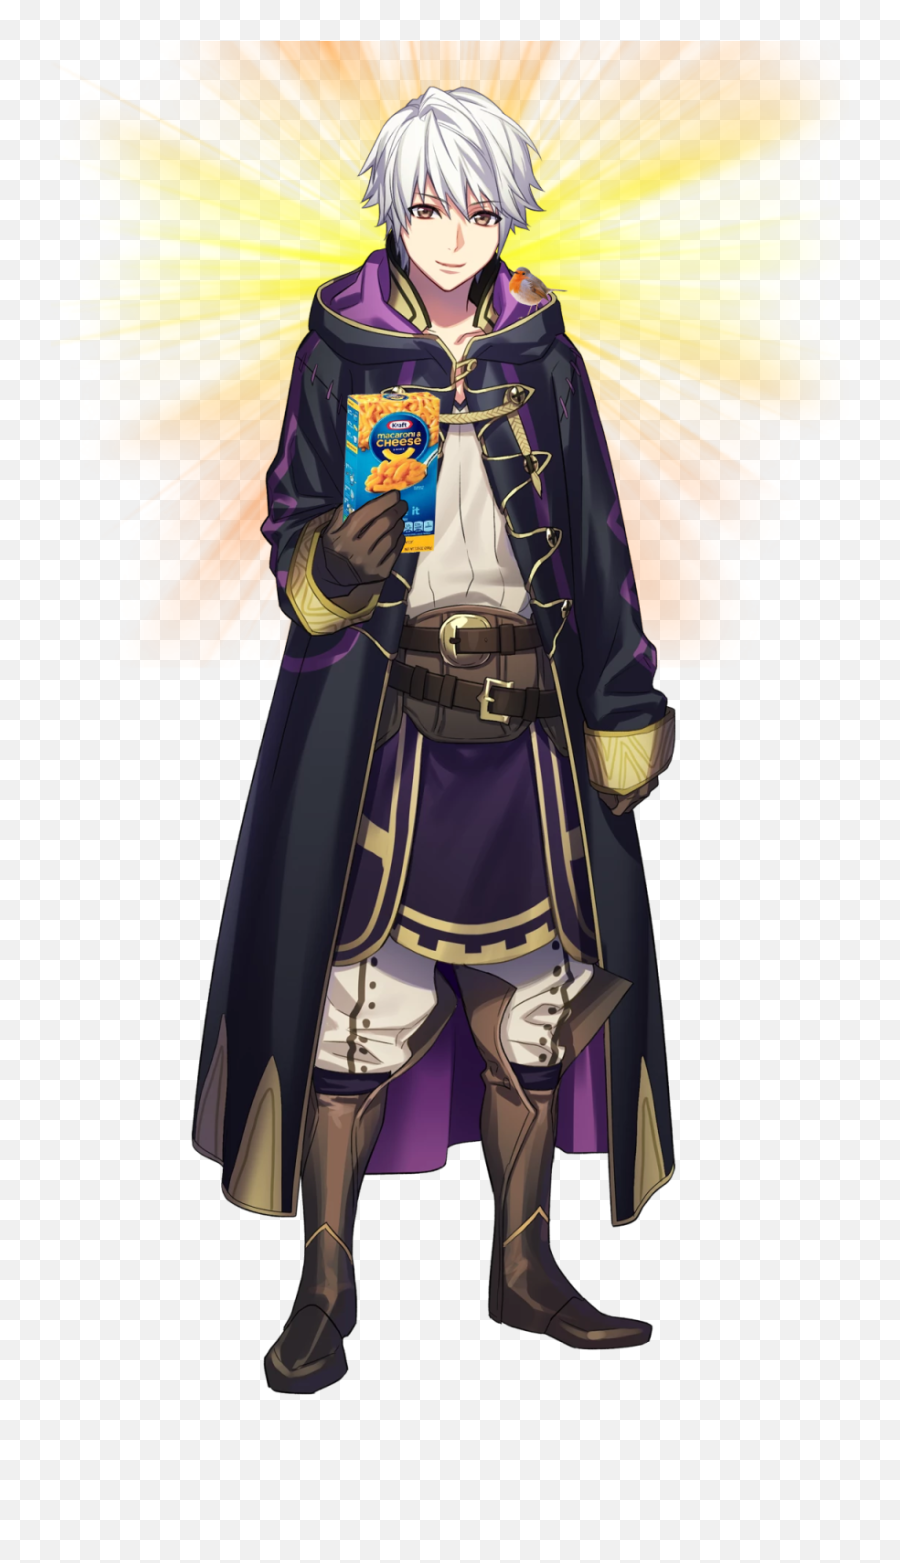 Download Biggie Cheese Png Image - Fire Emblem Heroes Male Robin,Biggie Cheese Png